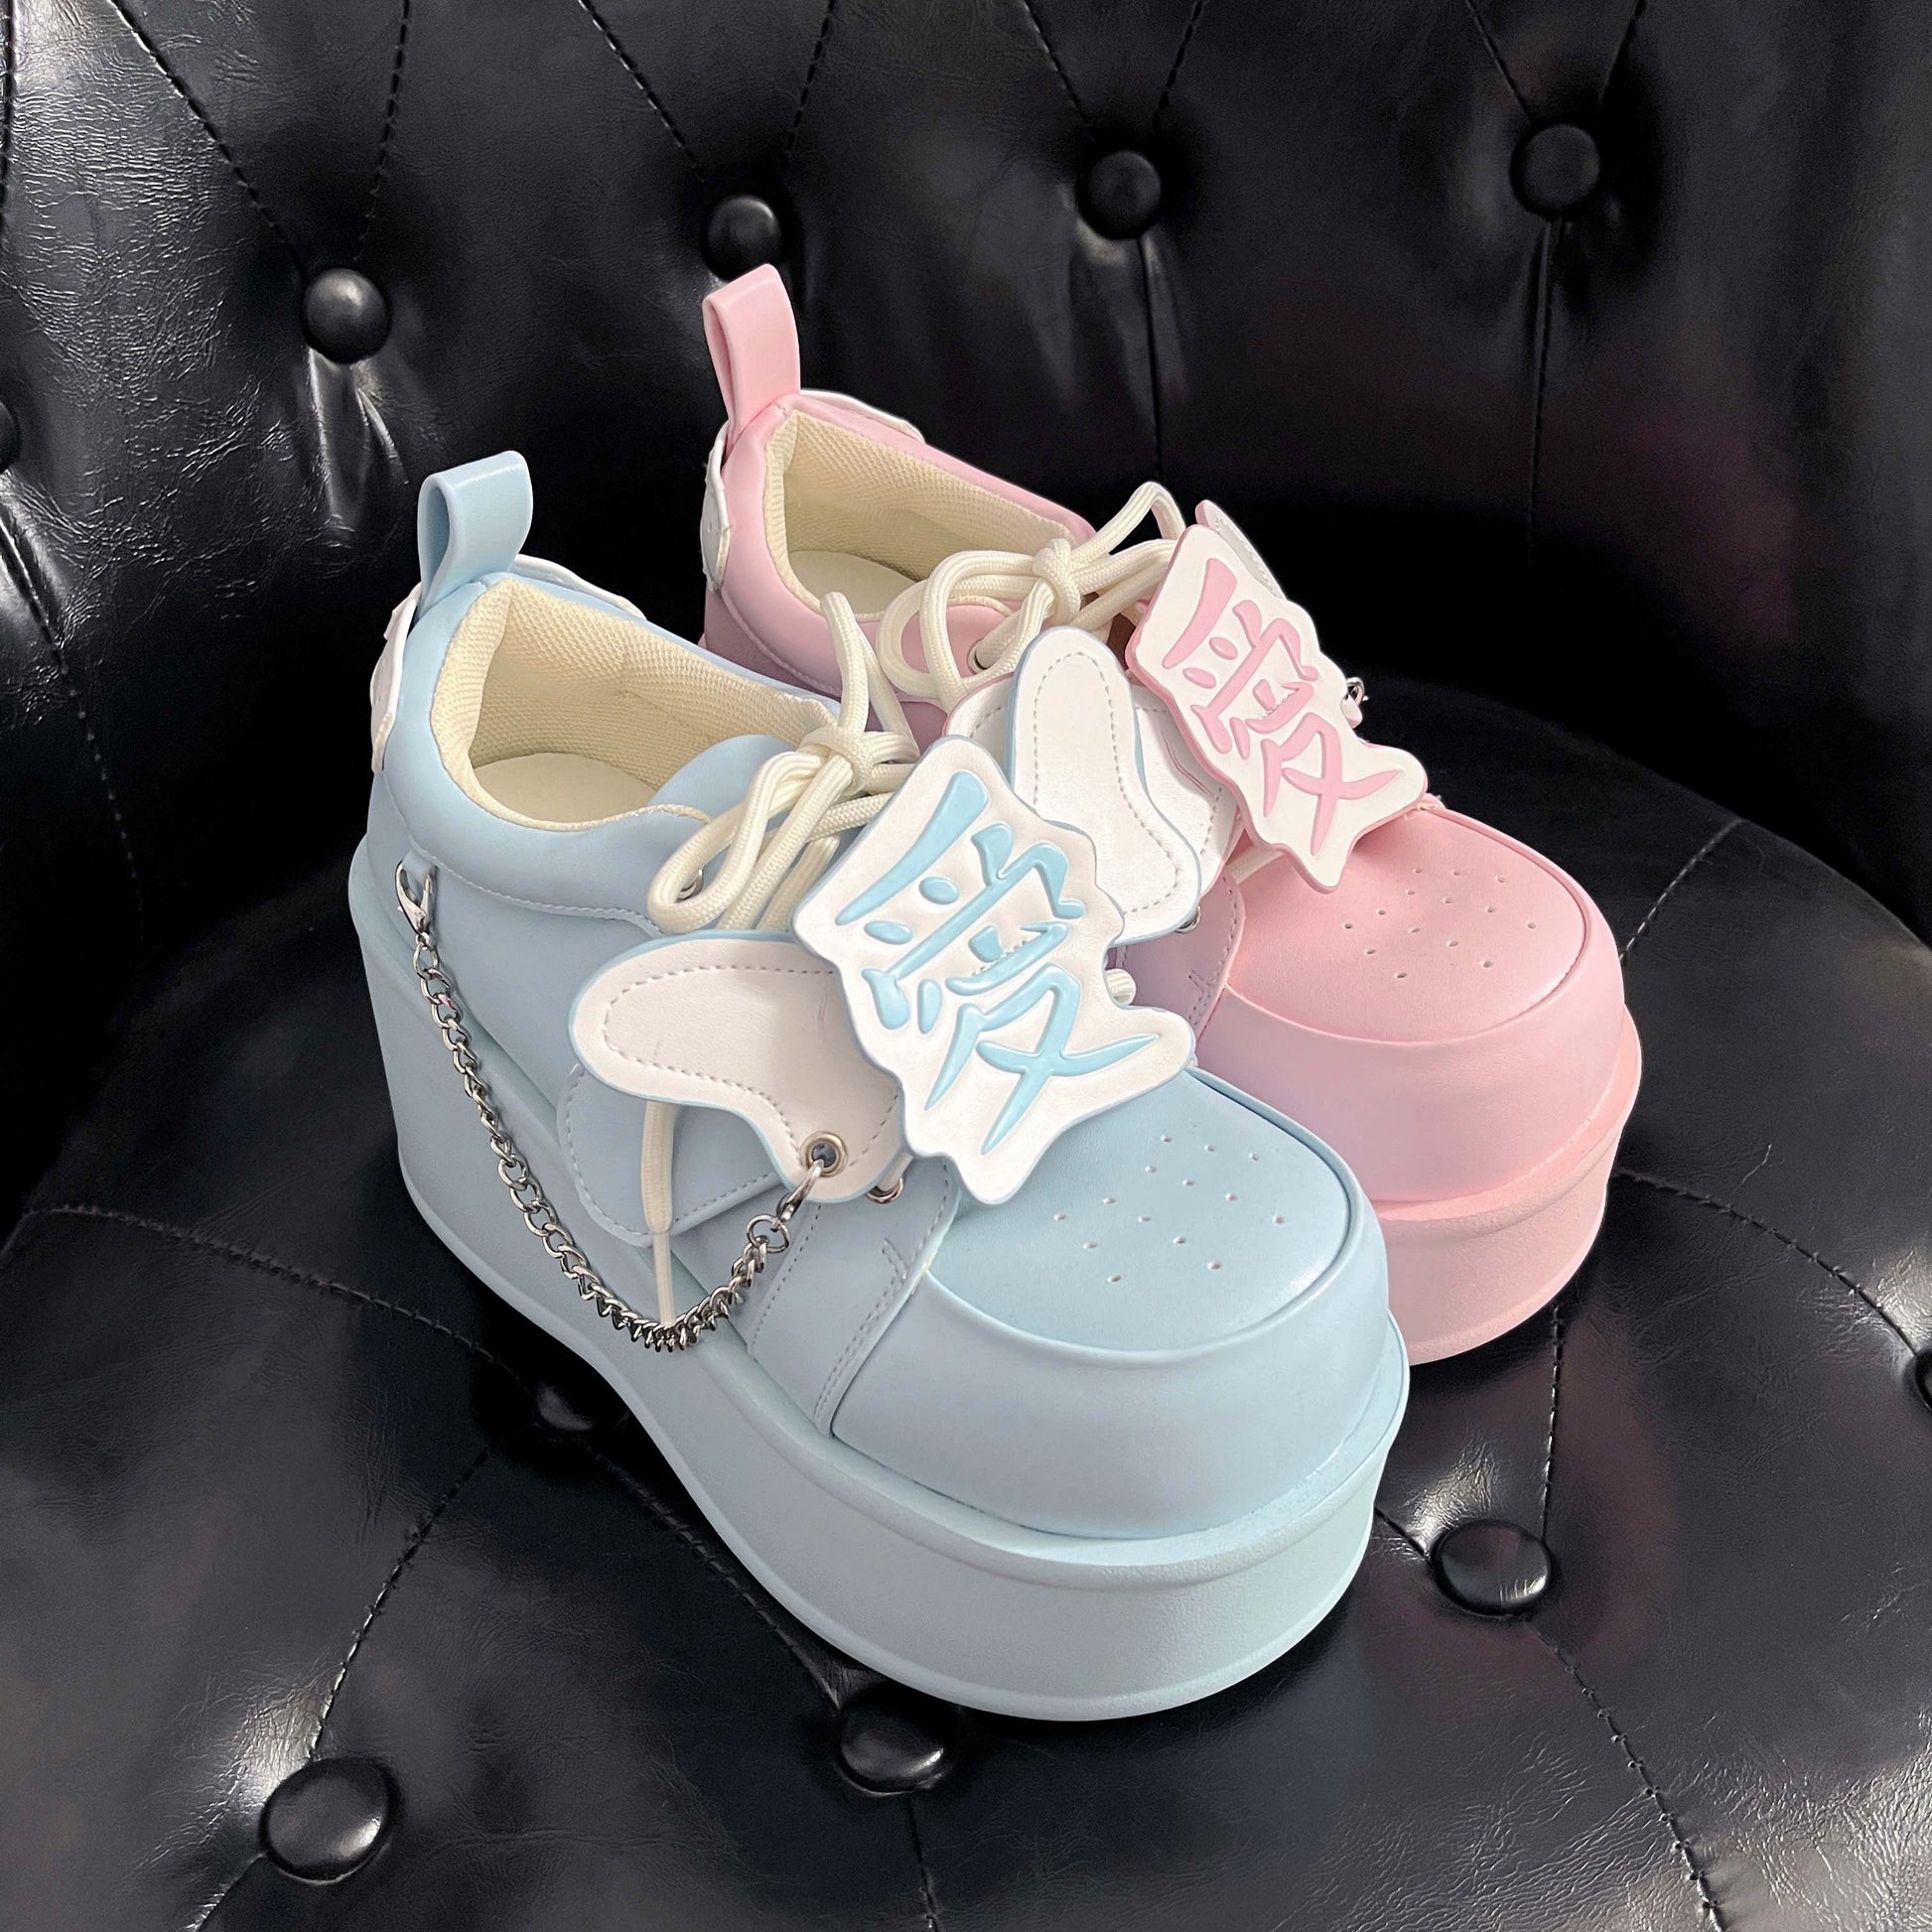 Tenshi Kaiwai Platform Shoes Subculture Thick-soled Shoes (34 35 36 37 38 39 40) 35748:503460 (34 35 36 37 38 39 40) 35748:503460